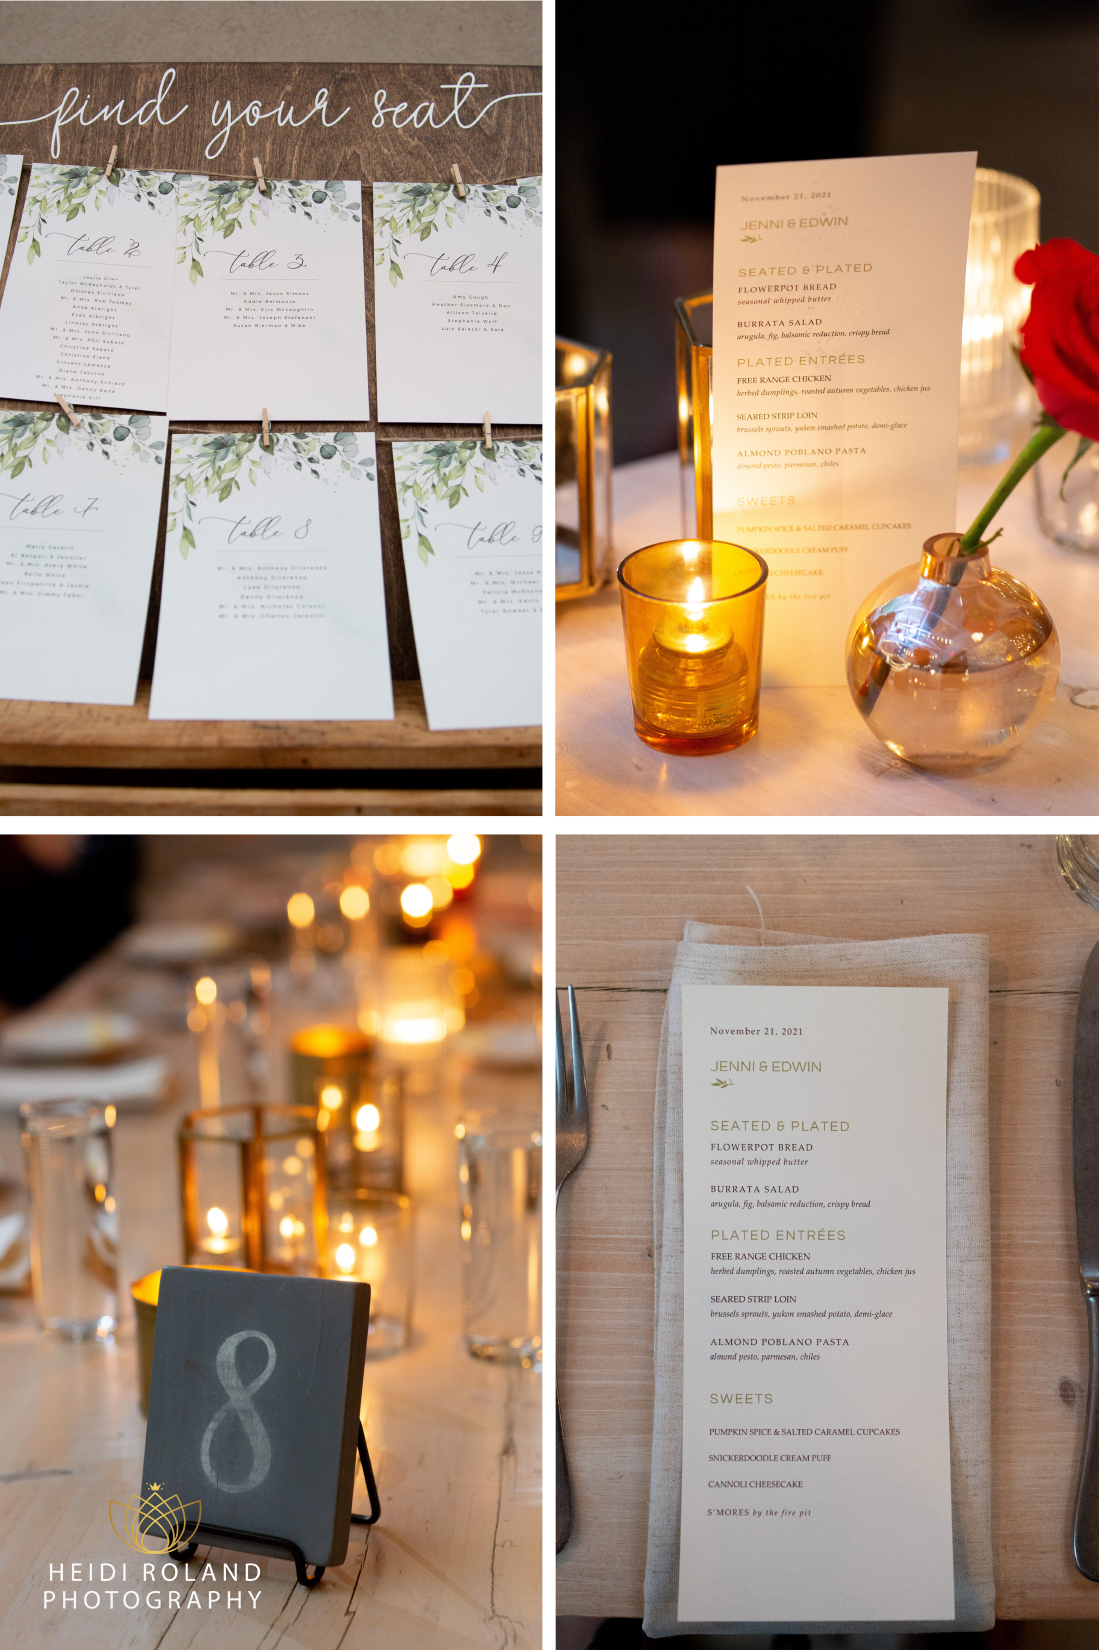 menu and place cards and table numbers at Terrain Devon wedding Reception 